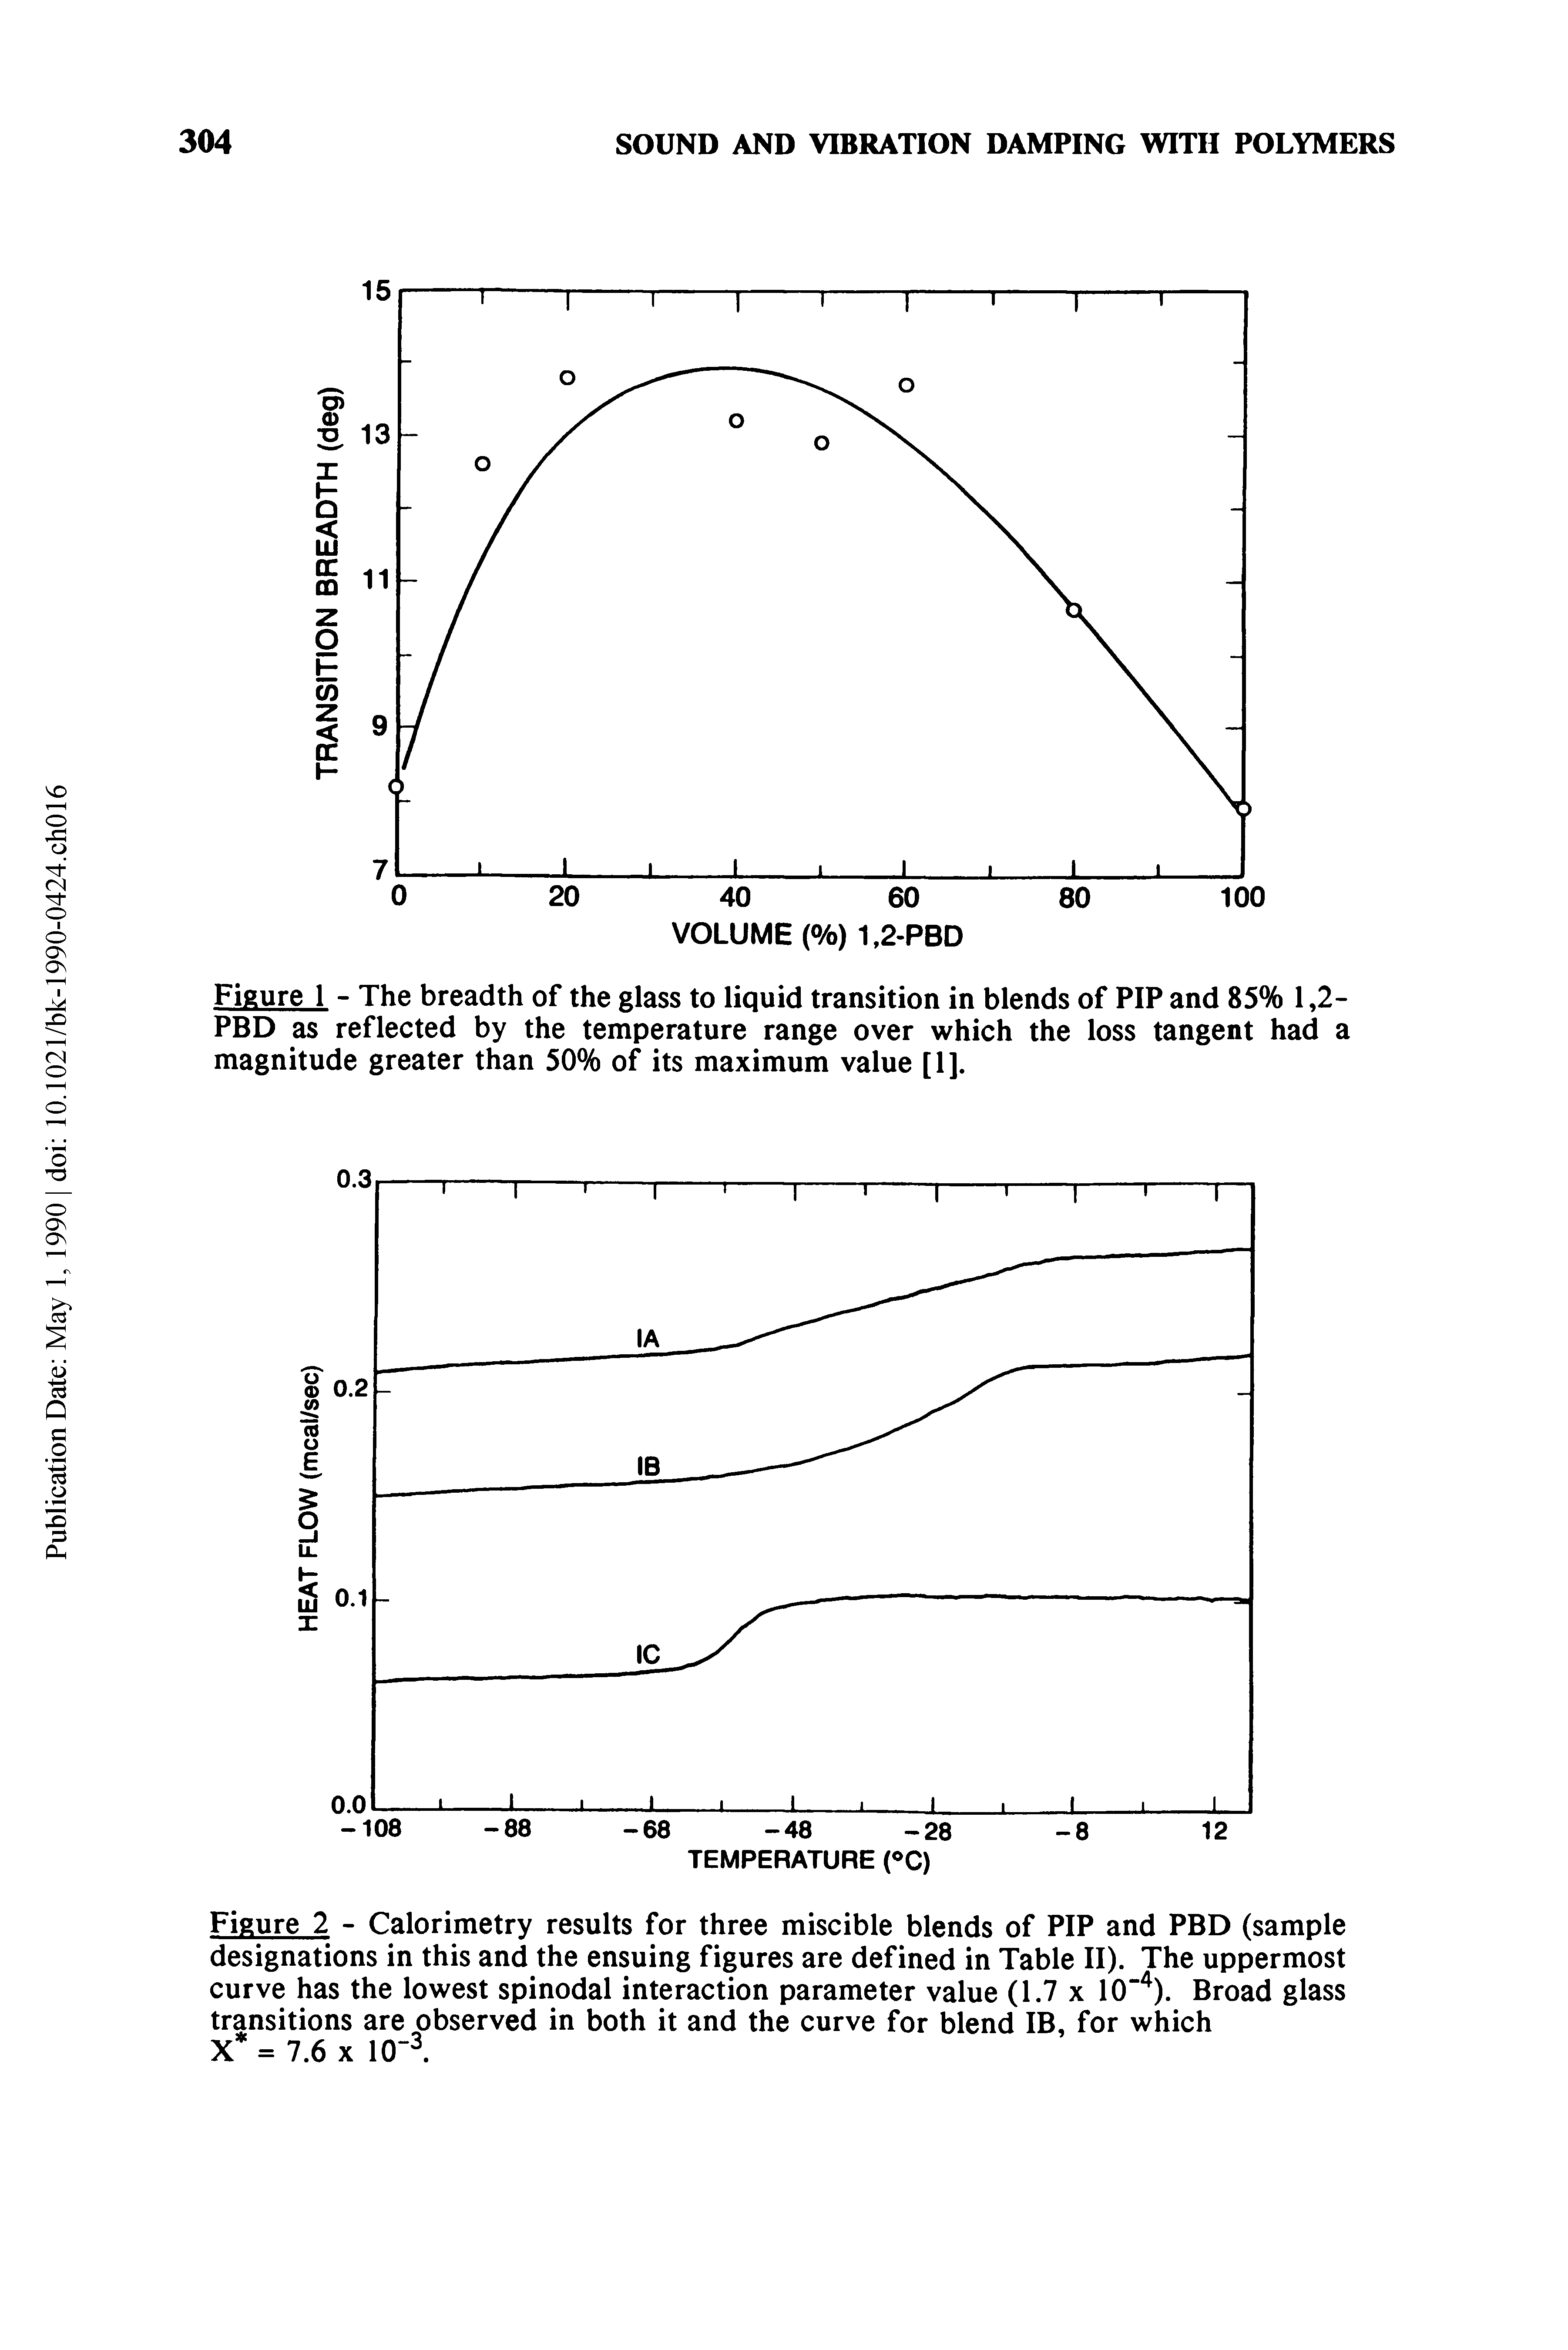 Figure 1 - The breadth of the glass to liquid transition in blends of PIP and 85% 1,2-PBD as reflected by the temperature range over which the loss tangent had a magnitude greater than 50% of its maximum value [1].